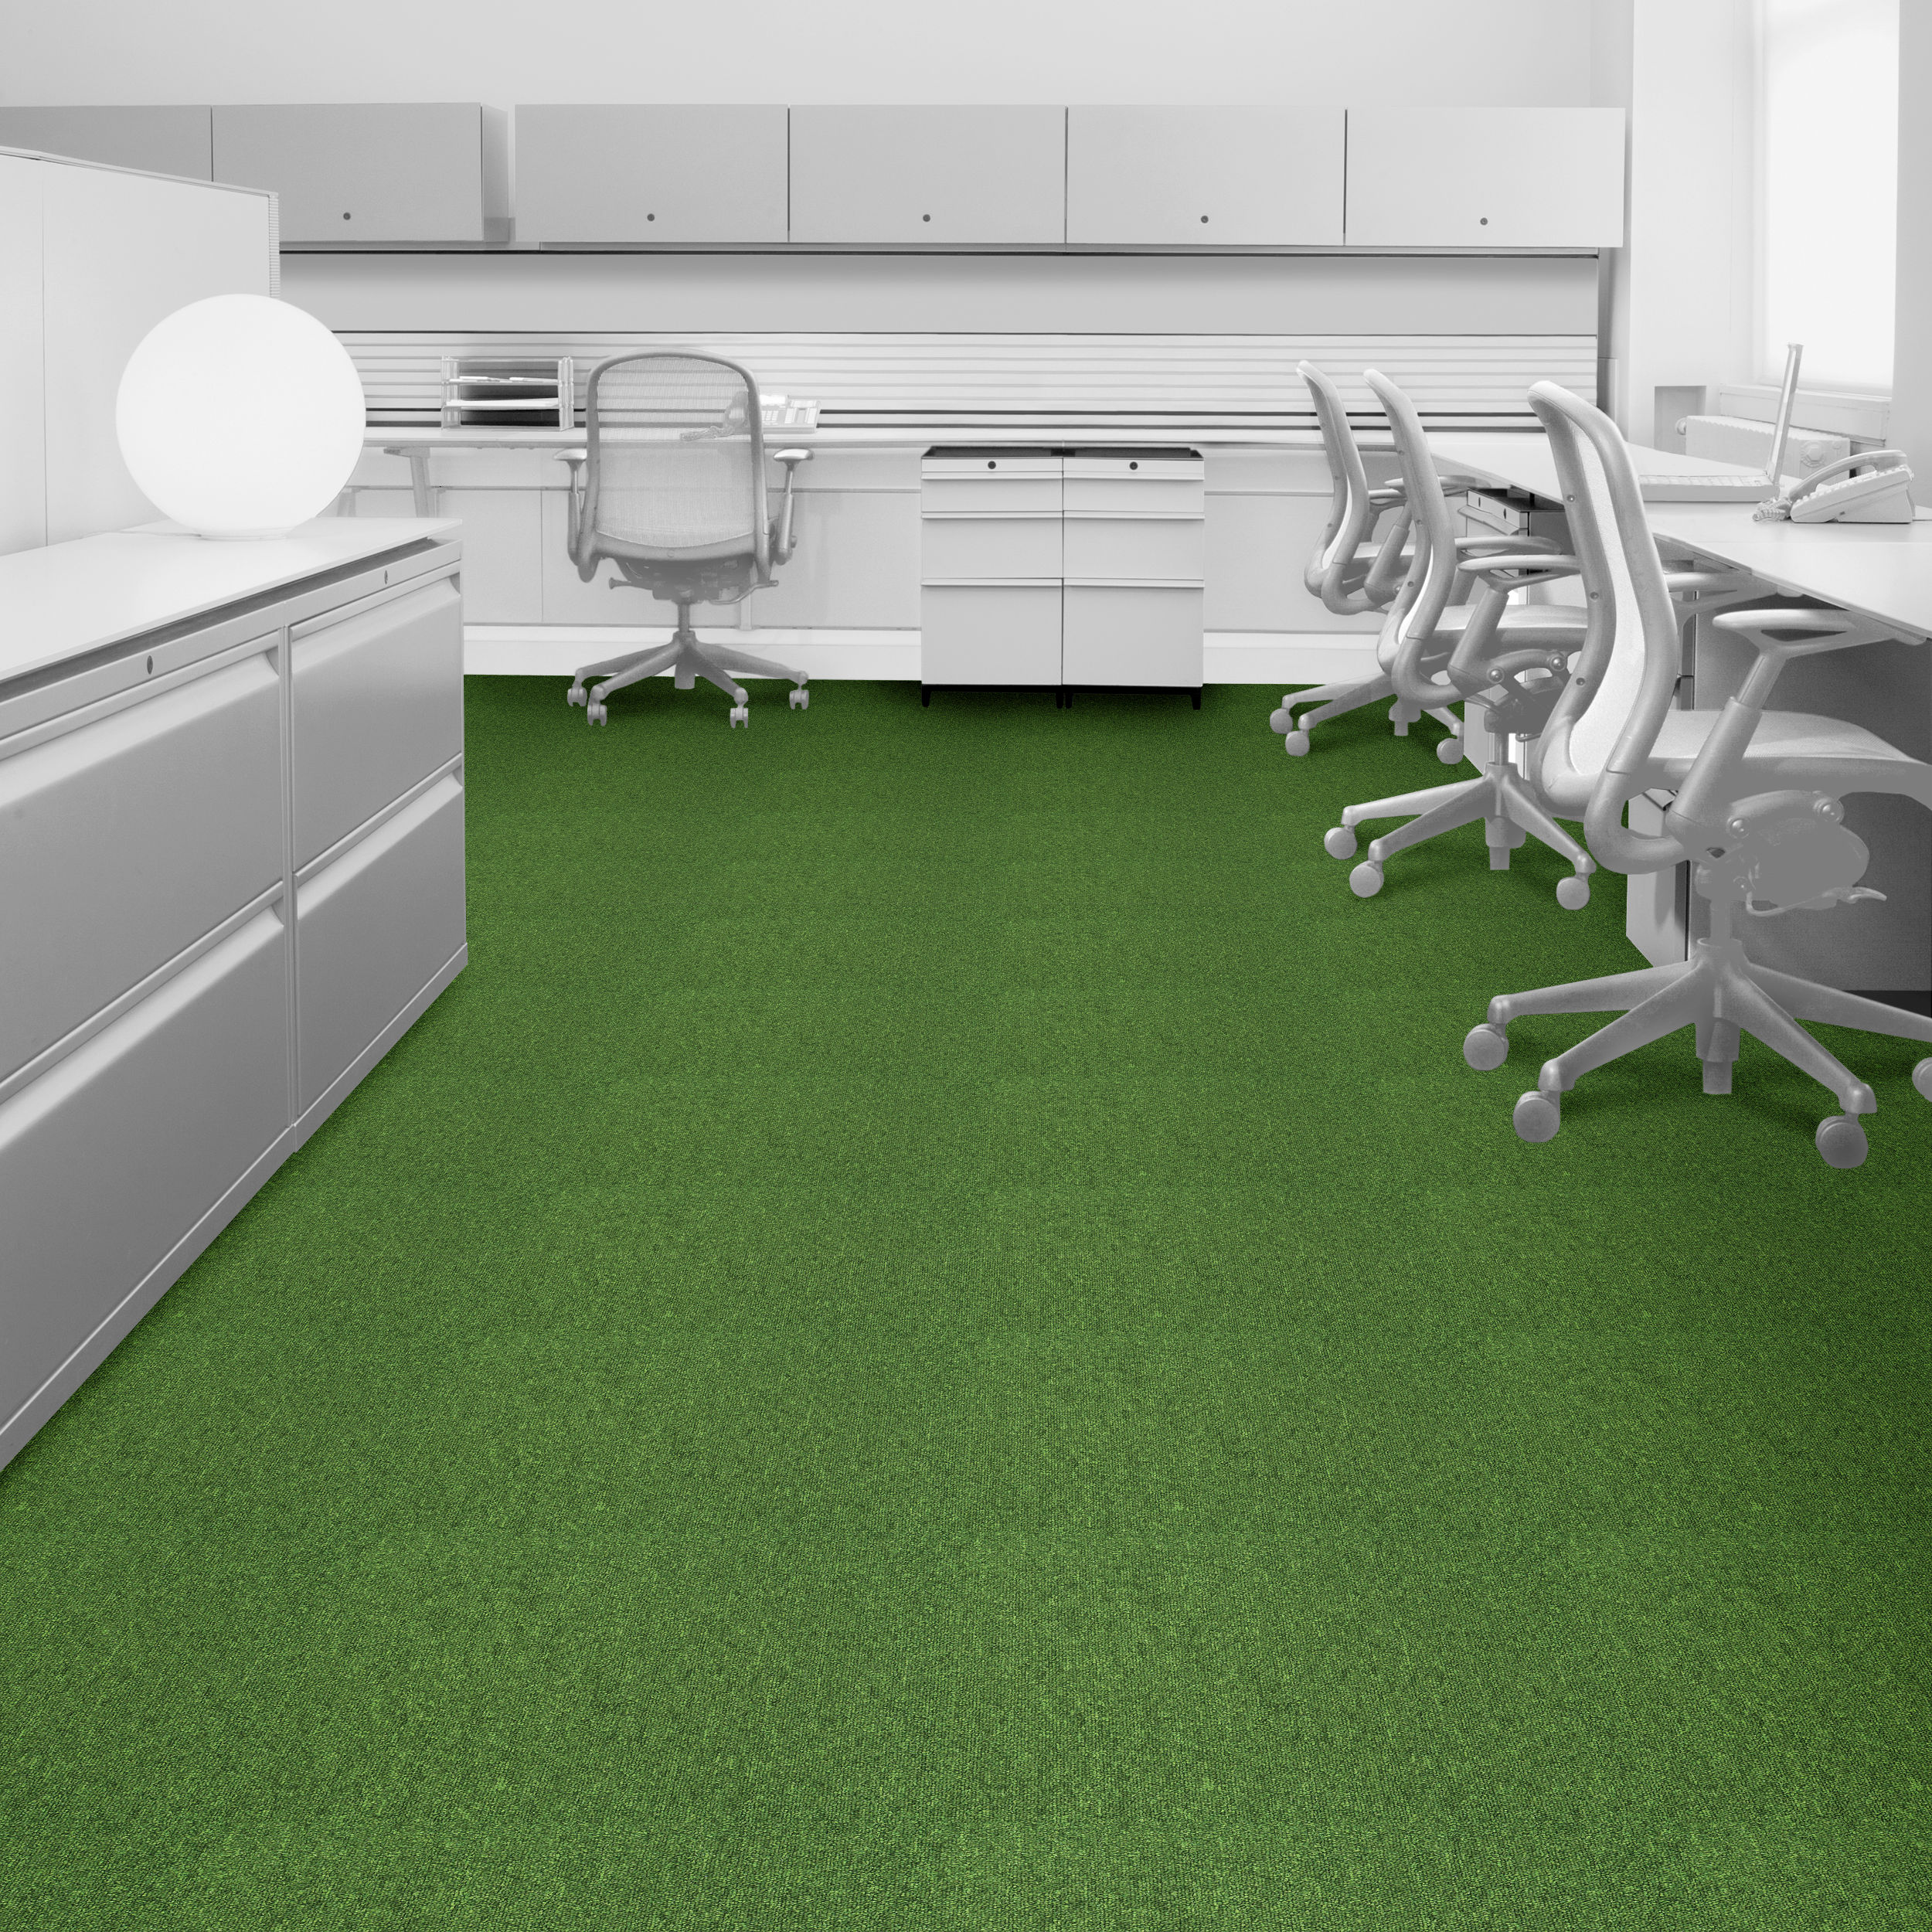 Interface Heuga 580 Carpet Tile - The Shire variation in office setting.